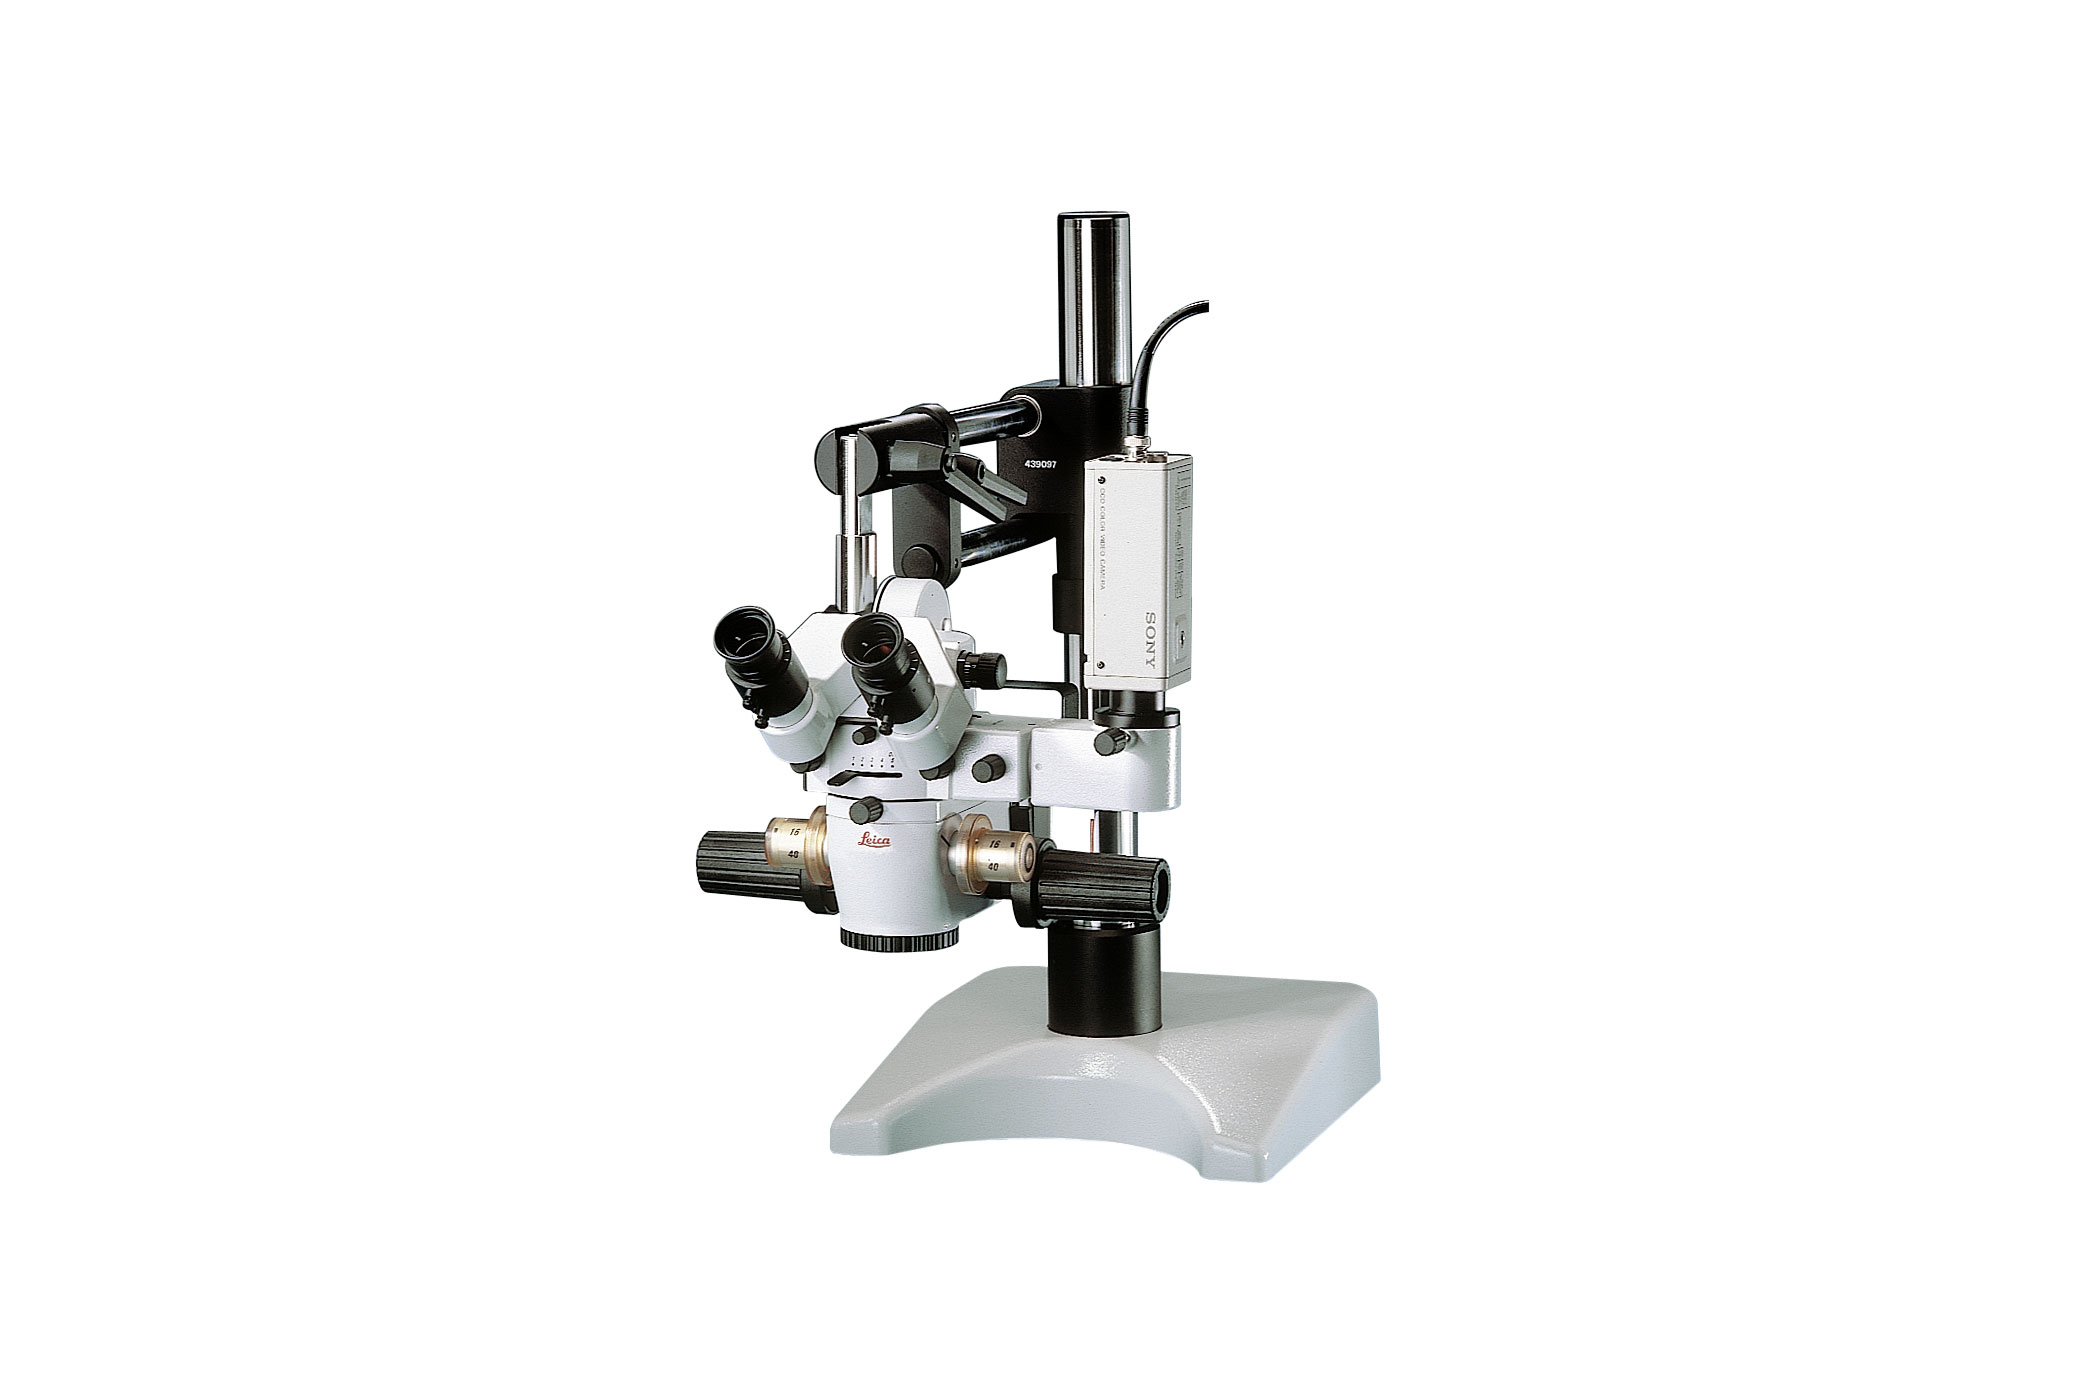 The Leica M651 MSD tabletop surgical microscope for the practice of microsurgery.